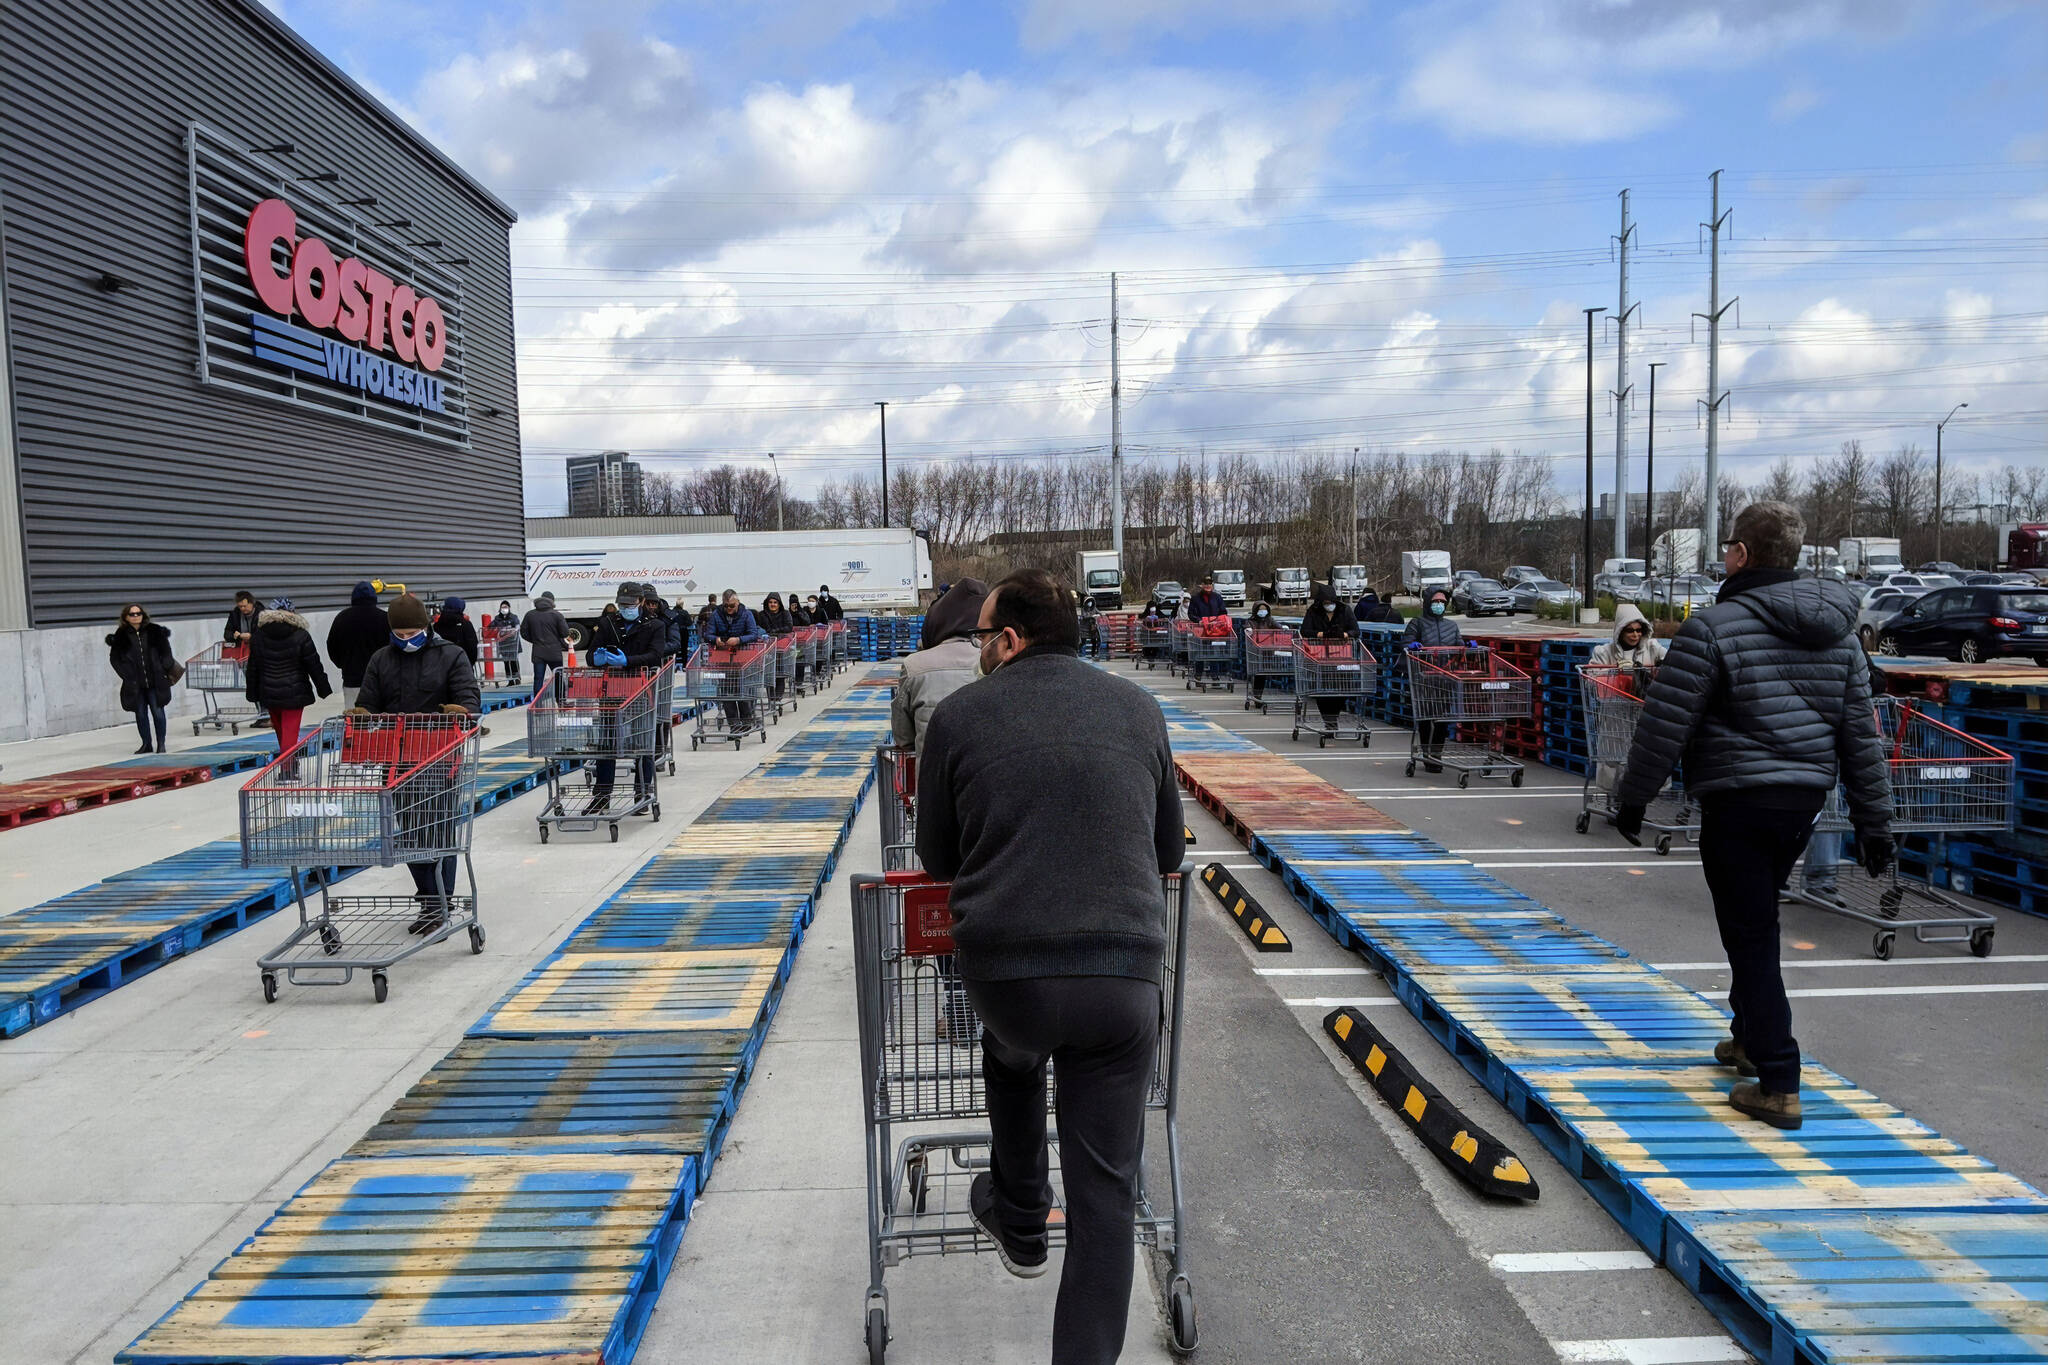 The lineups outside Costco stores in Toronto are ridiculous right now